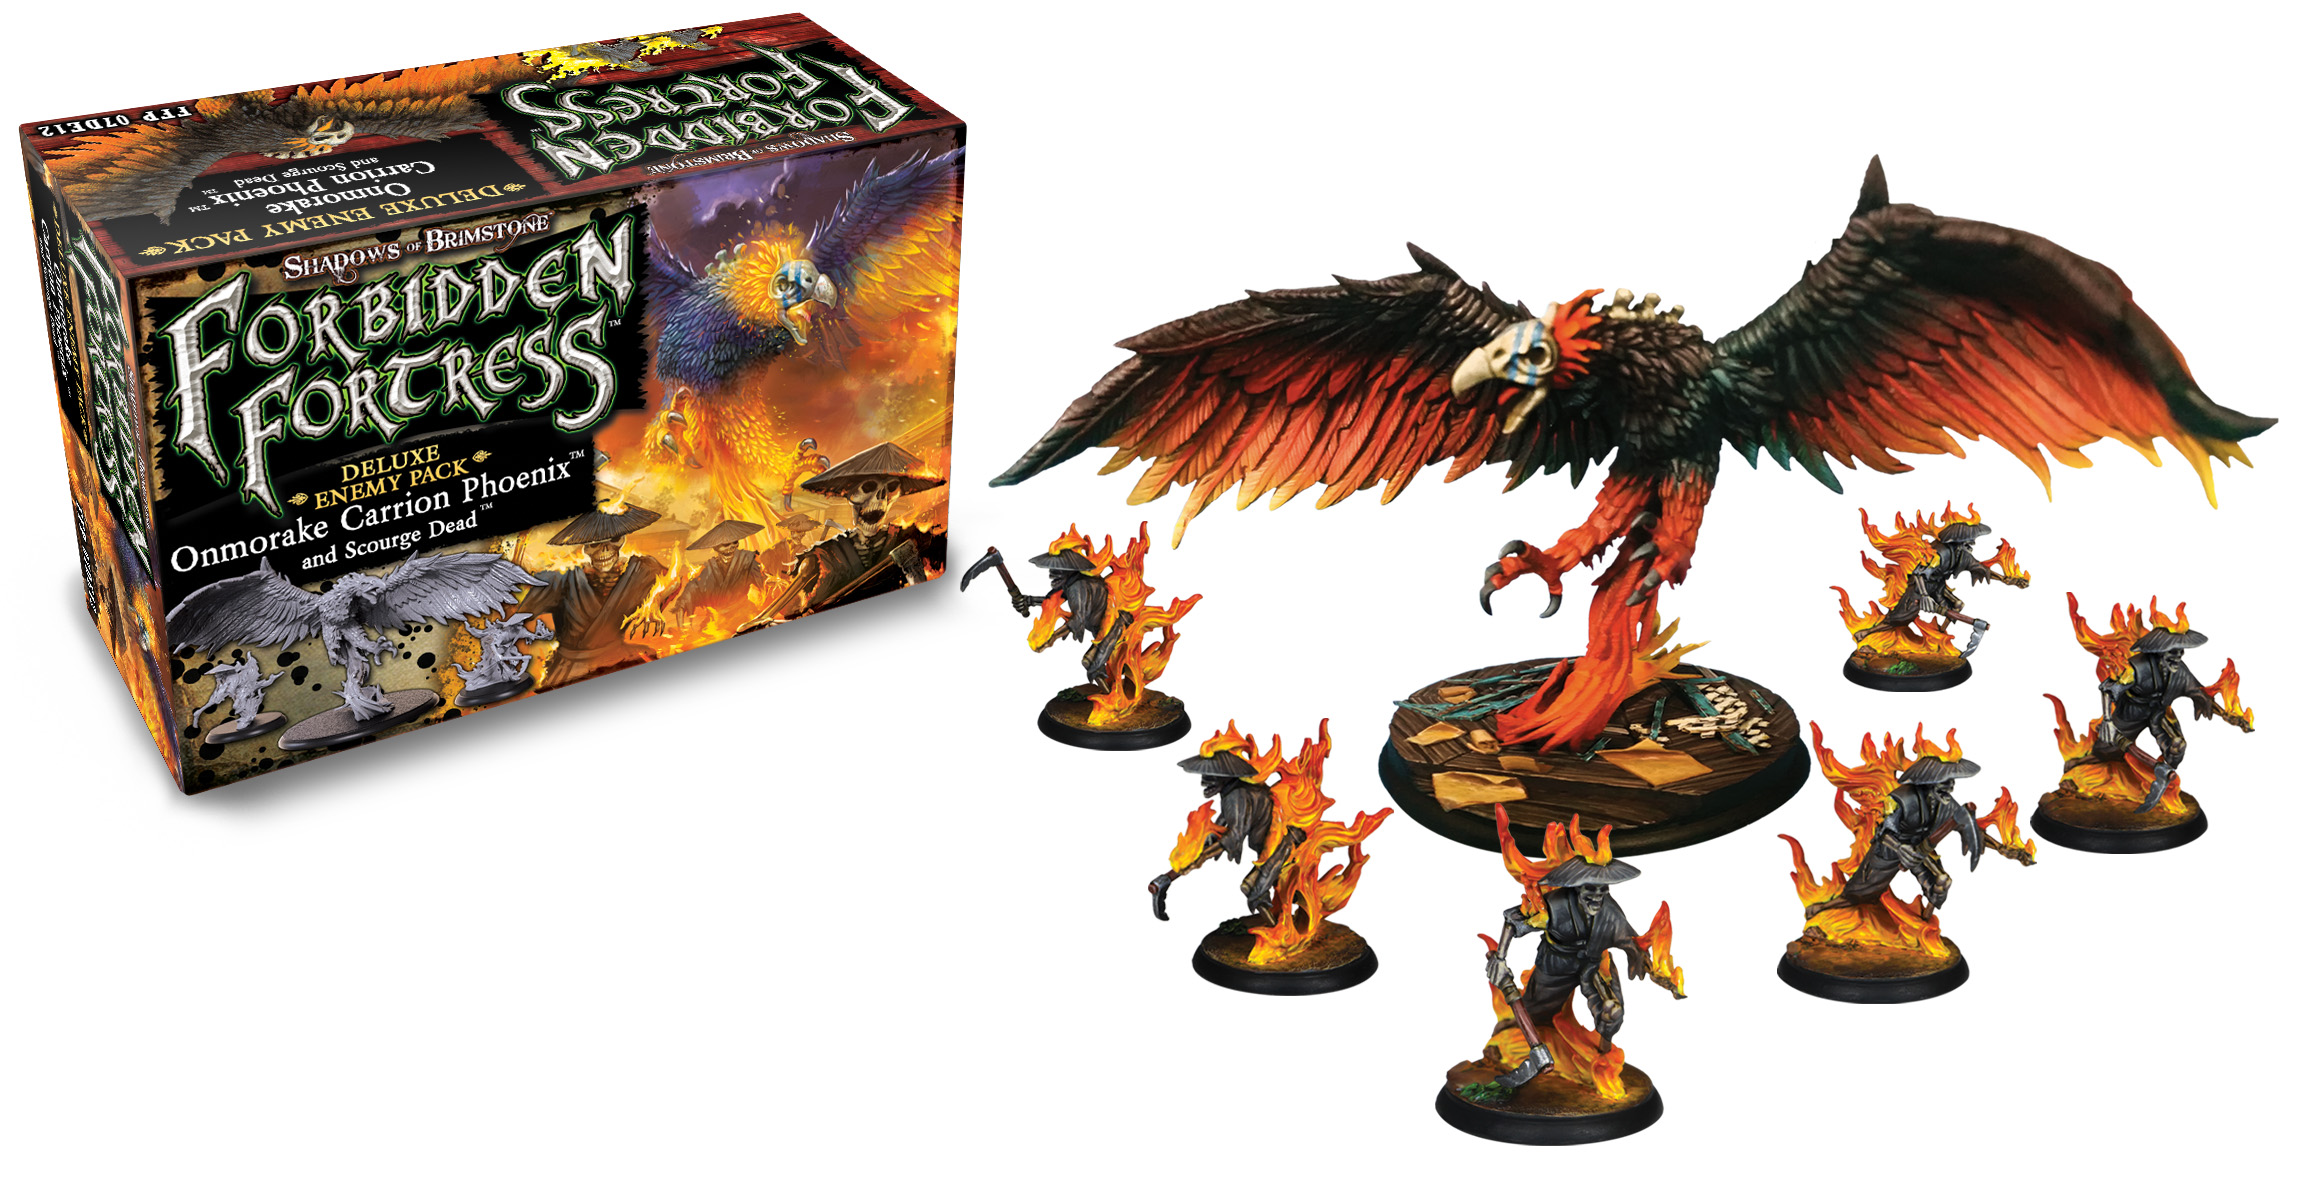 Shadows of Brimstone: Forbidden Fortress: Deluxe Enemy Pack: Onmorake Carrion Phoenix and Scourge Dead 